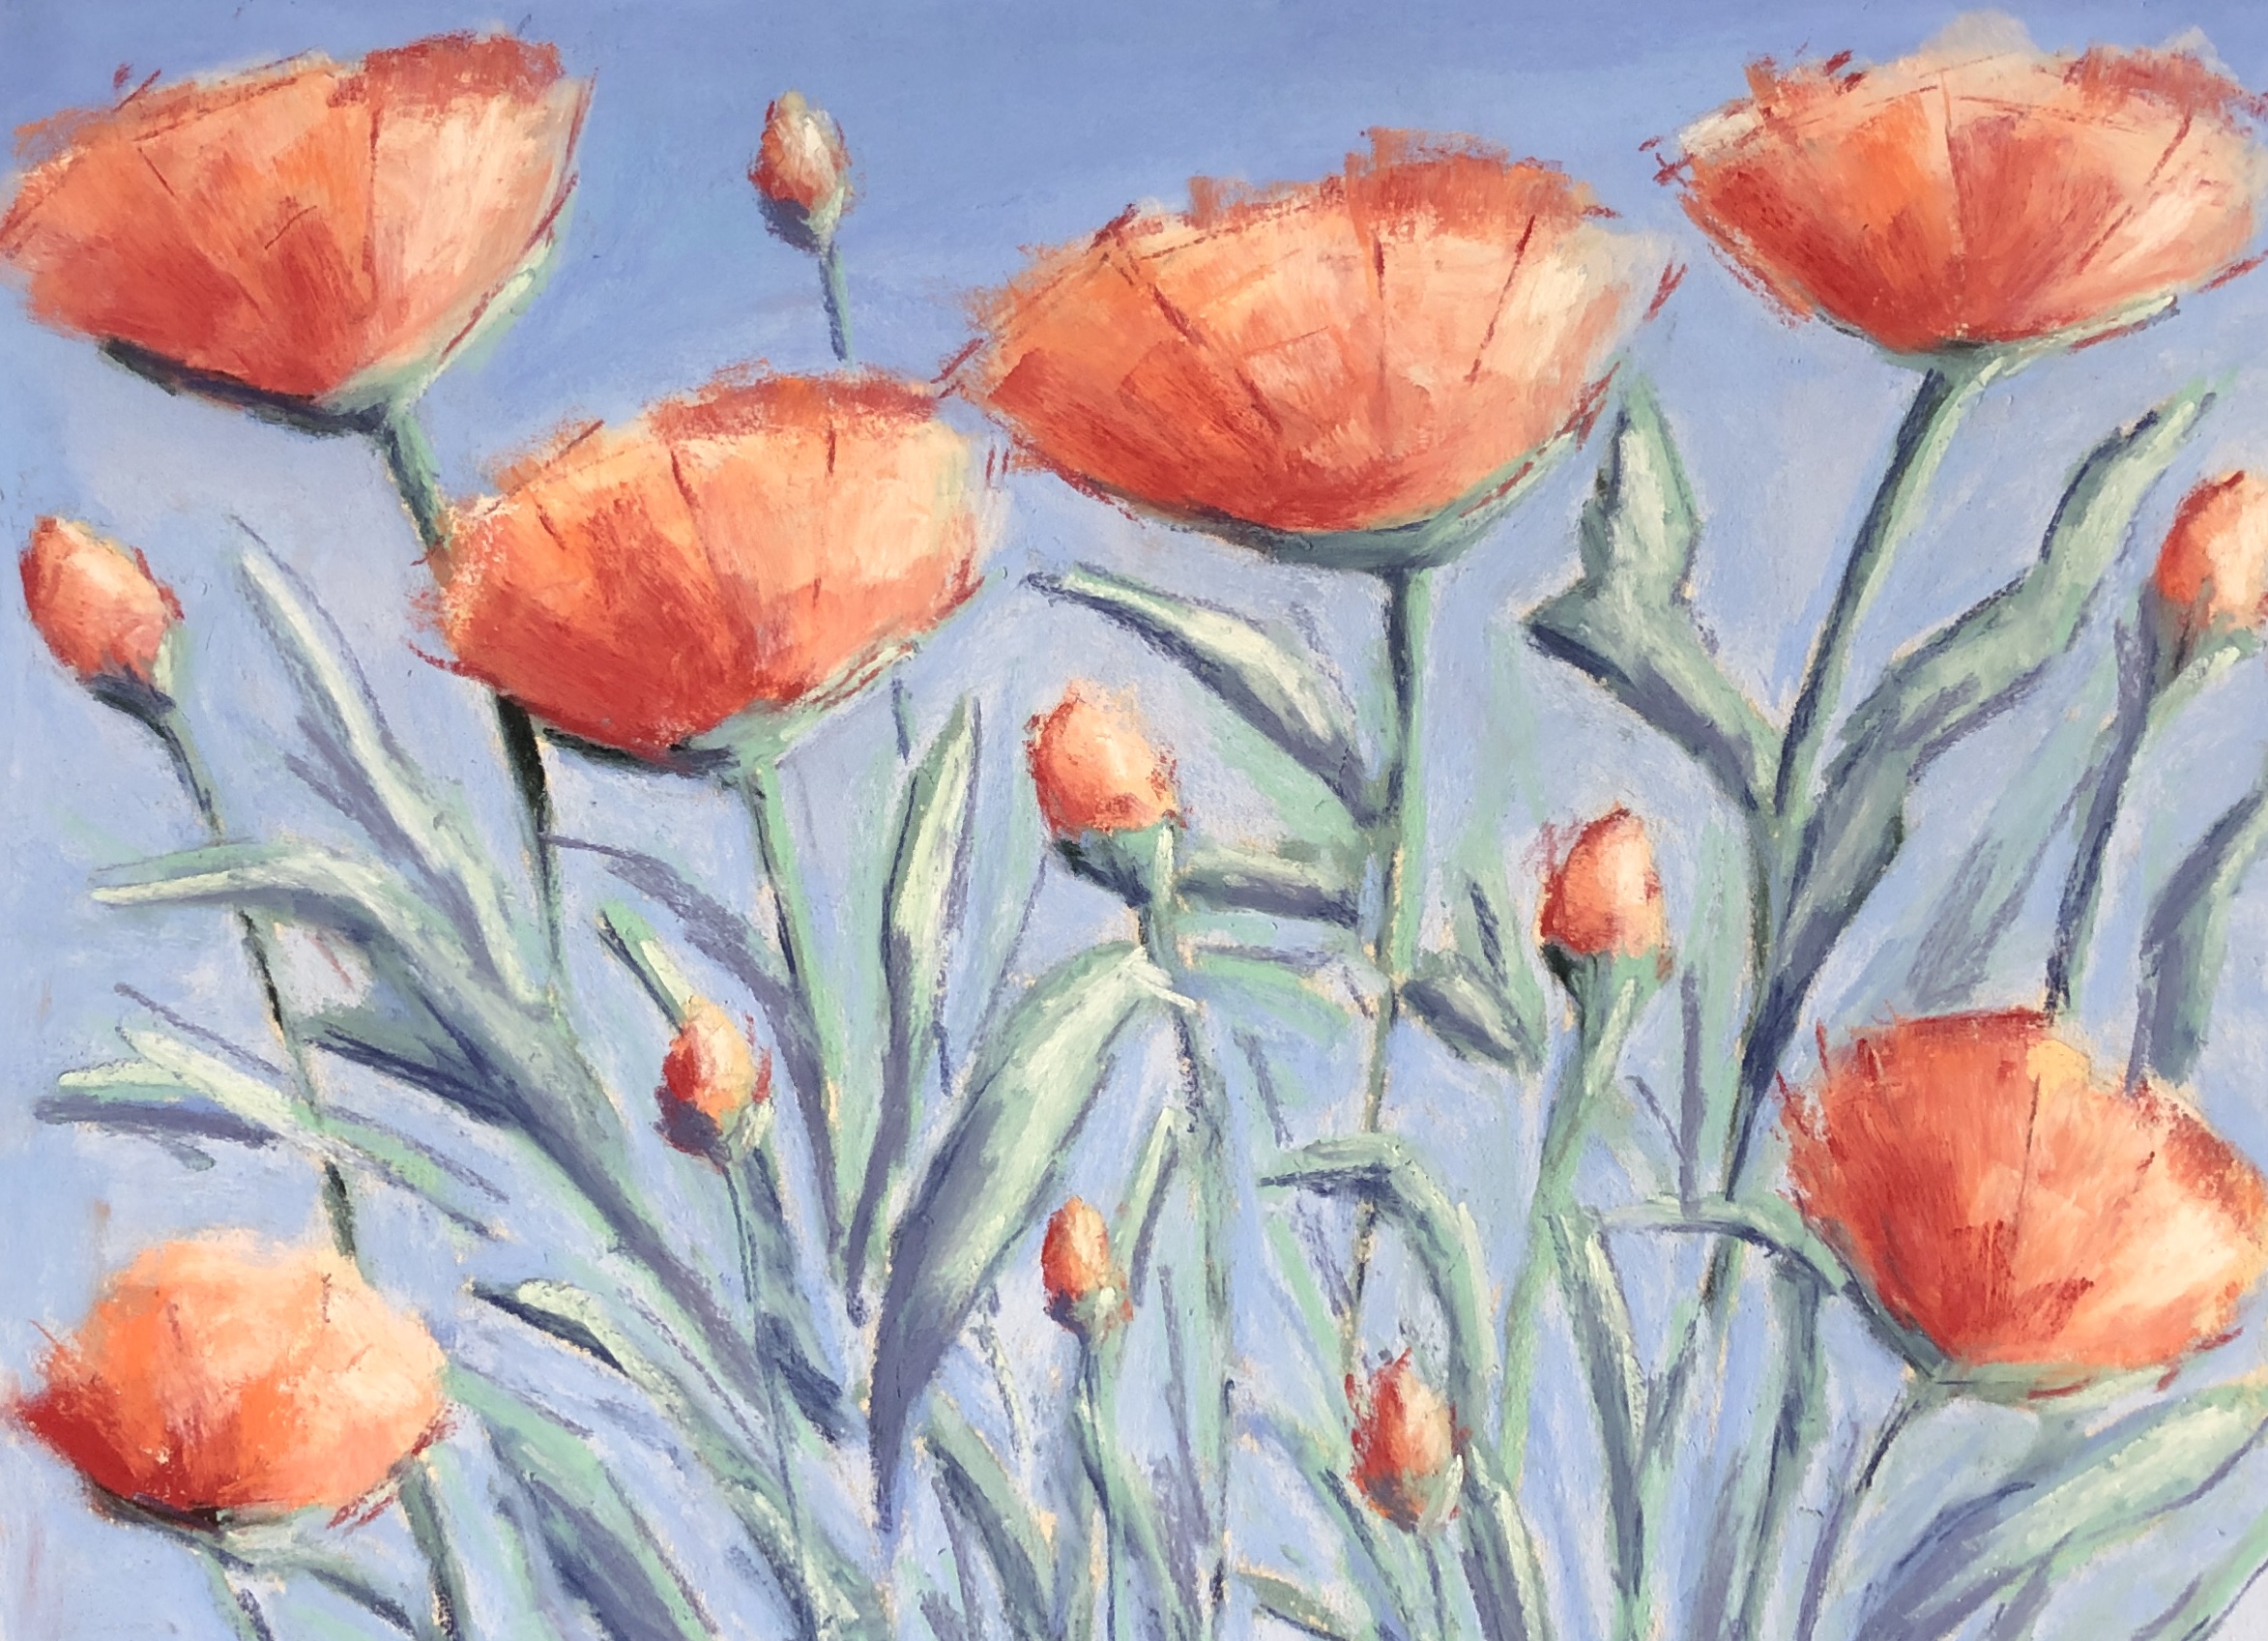 Poppies Under a Blue Sky painting by Lincolnshire artist Geraldine Segre